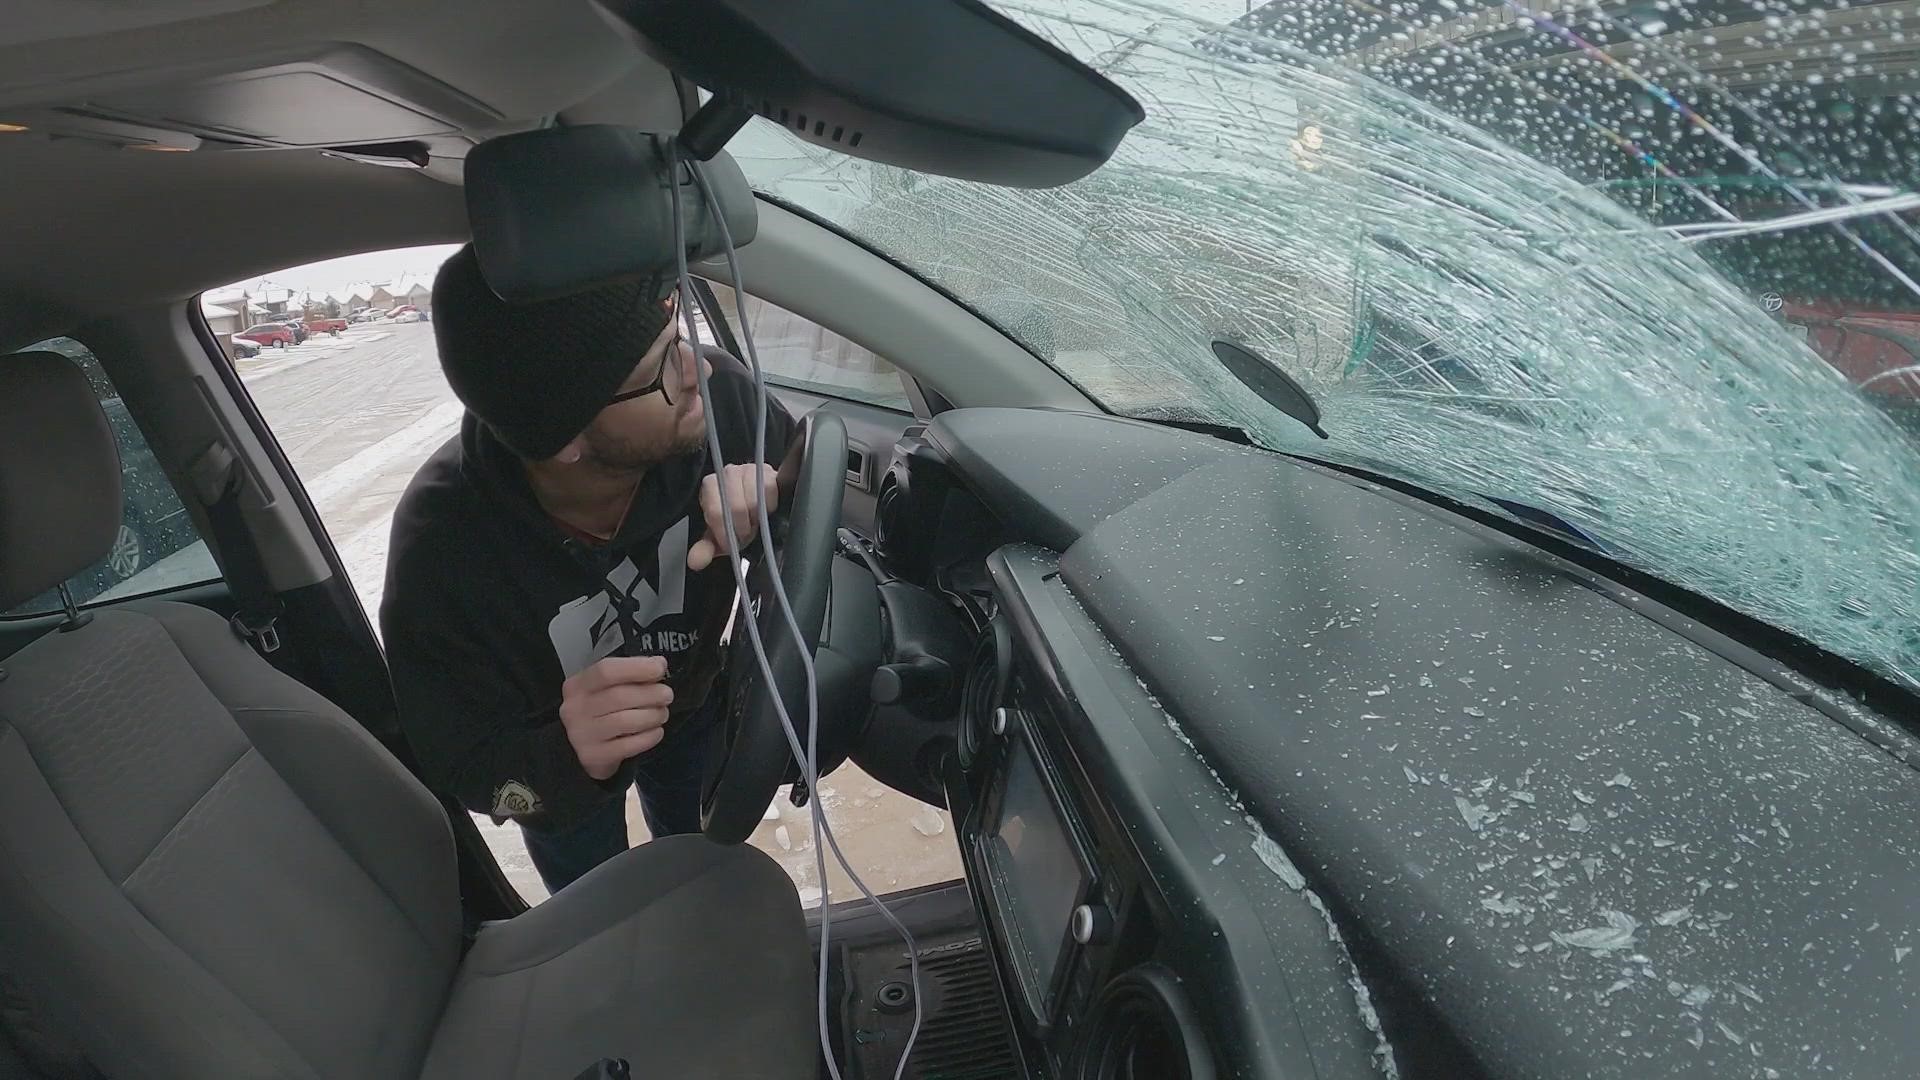 Michael Frey was trying to help neighbors by giving rides when ice from another car flew into his car and broke his windshield.